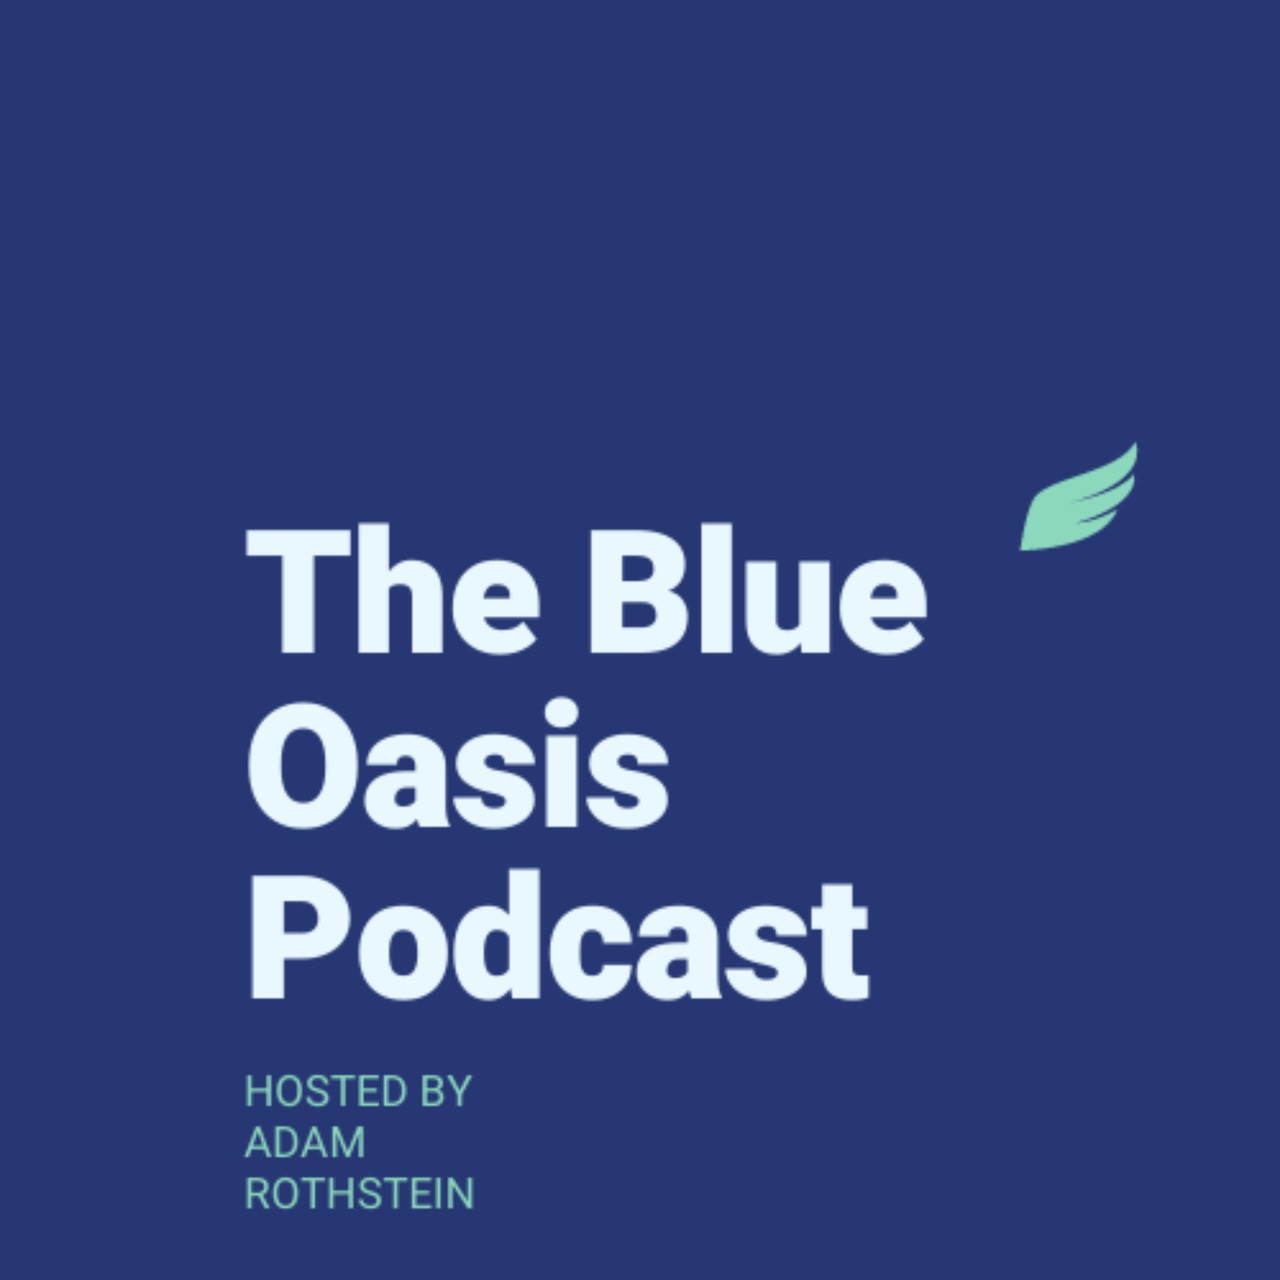 The Blue Oasis Podcast Newsletter